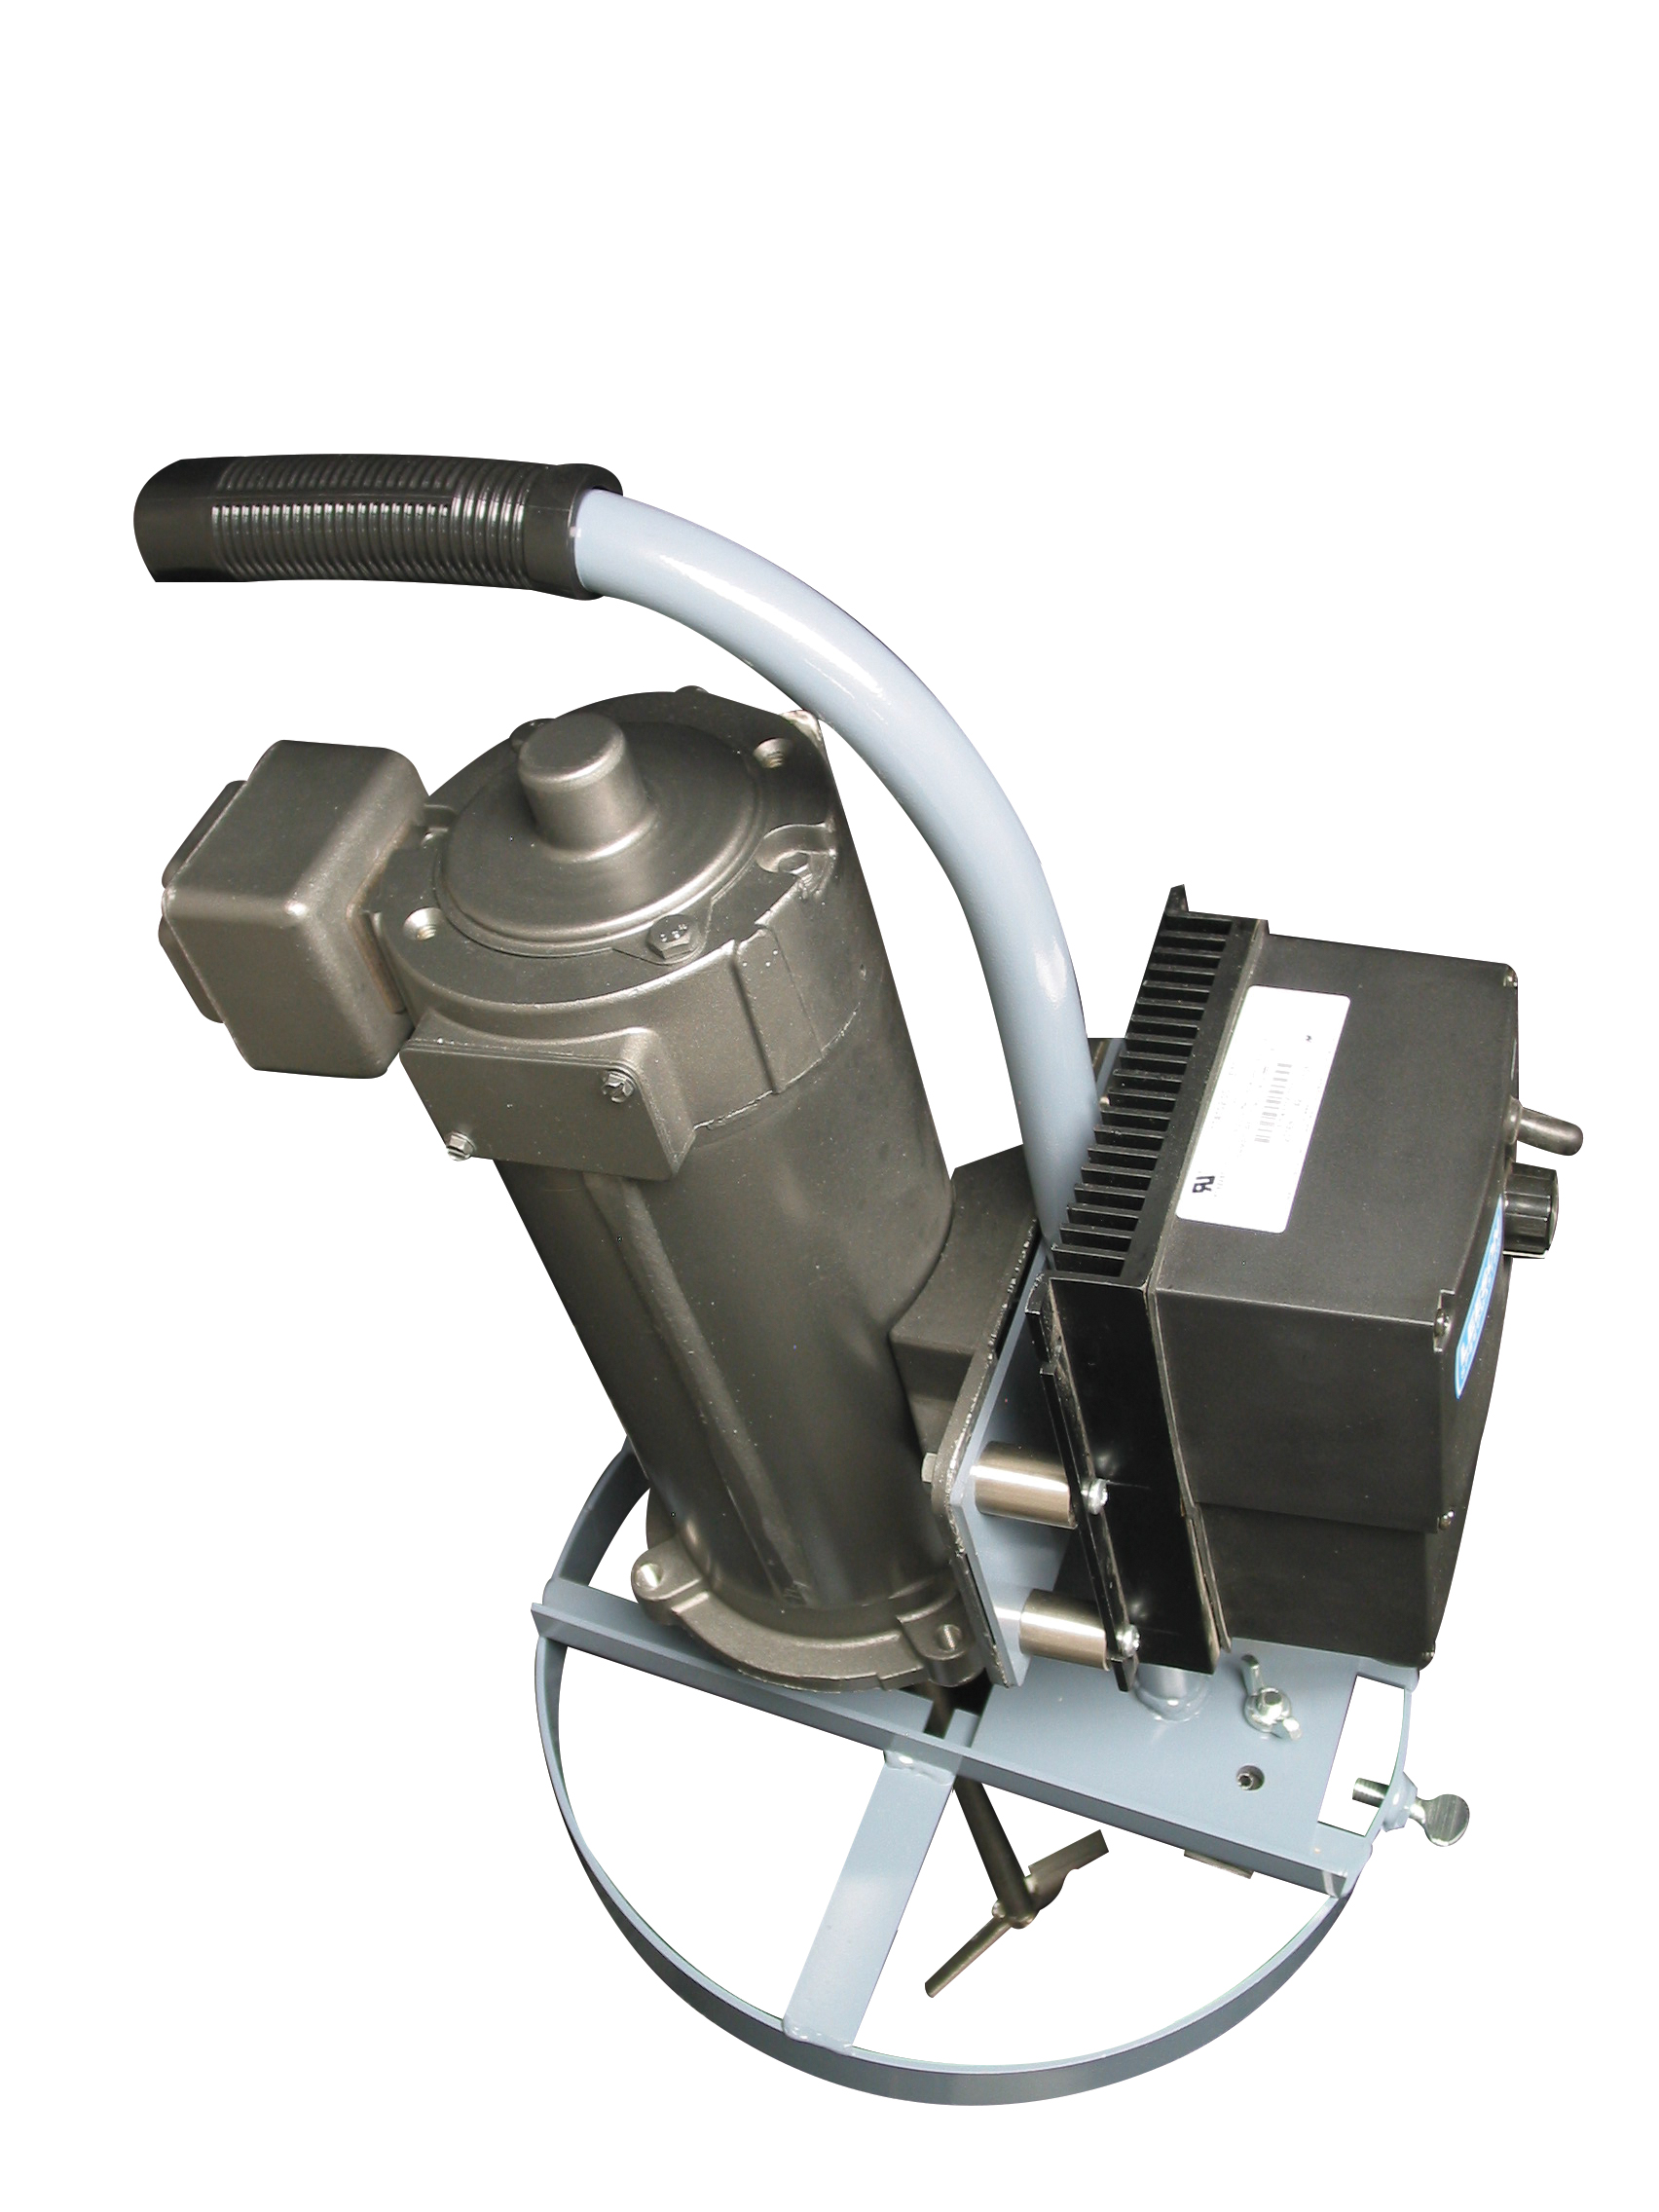  1/2 HP Electric Direct Drive Variable Speed Quic Ring Mount Mixer - image 2